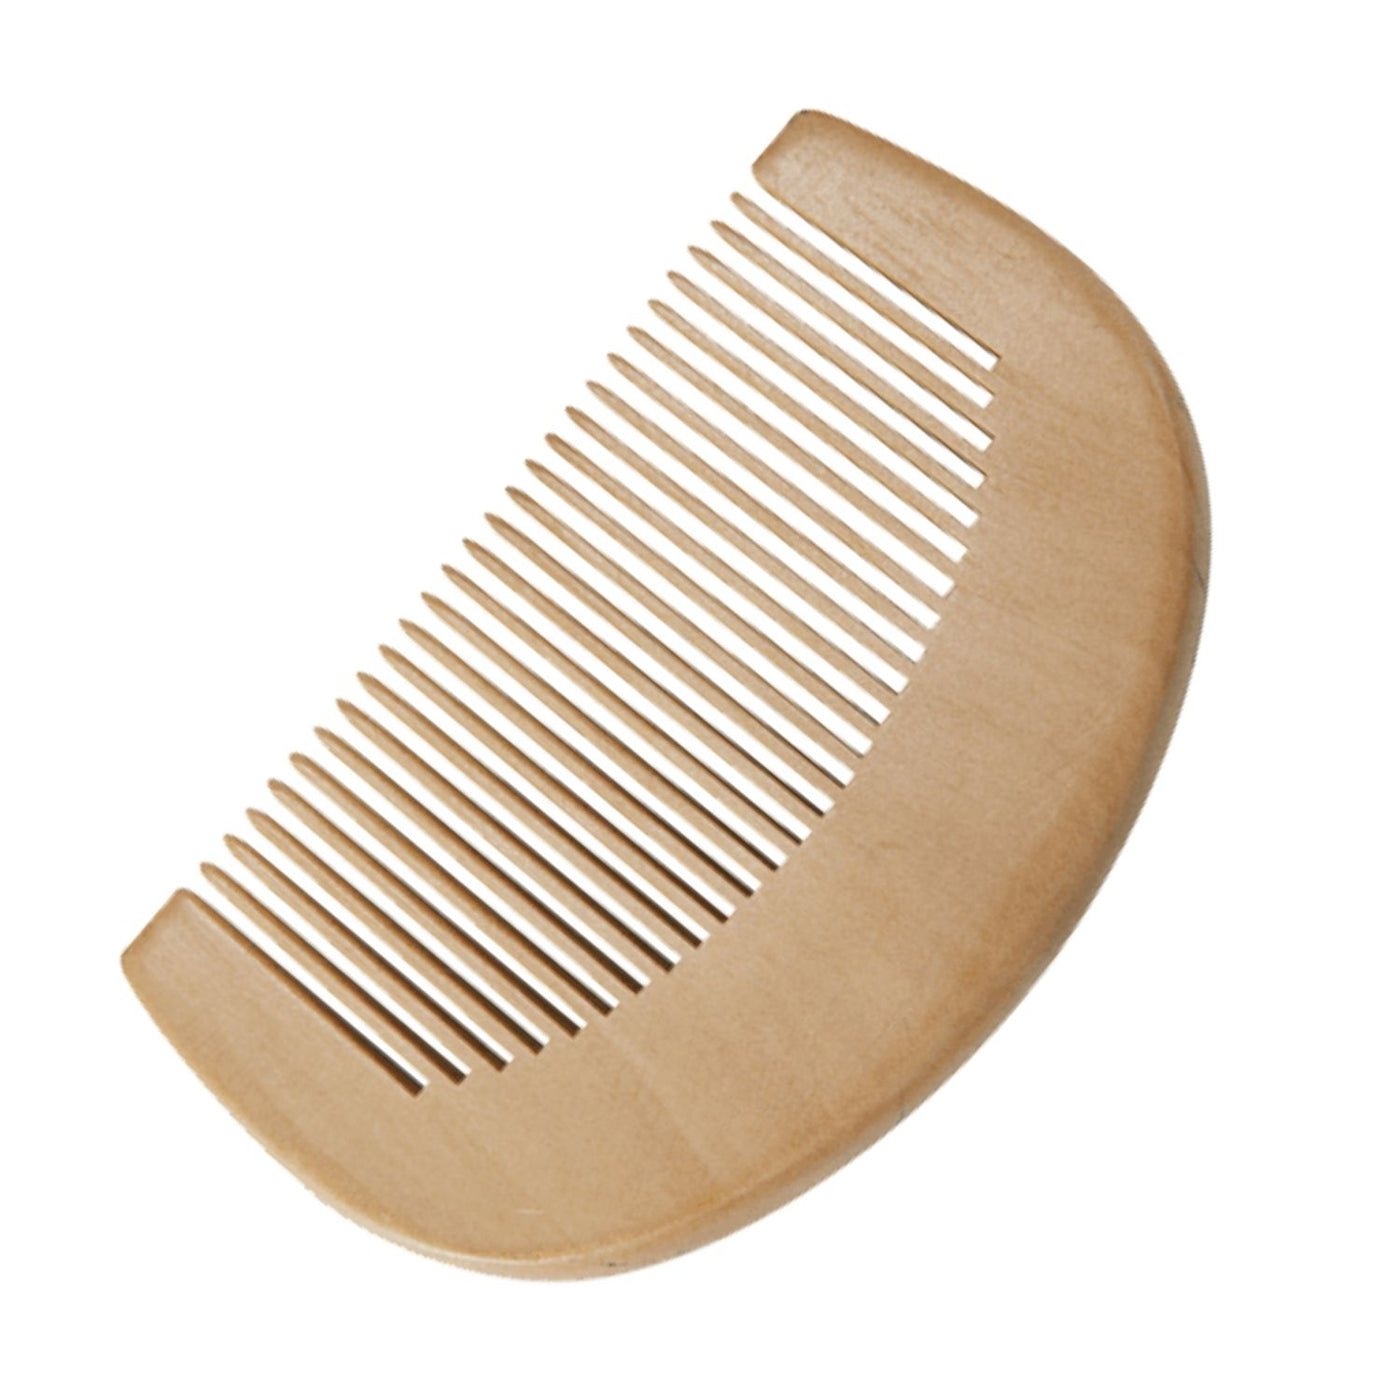  Beard Comb by Naked Armor sold by Naked Armor Razors